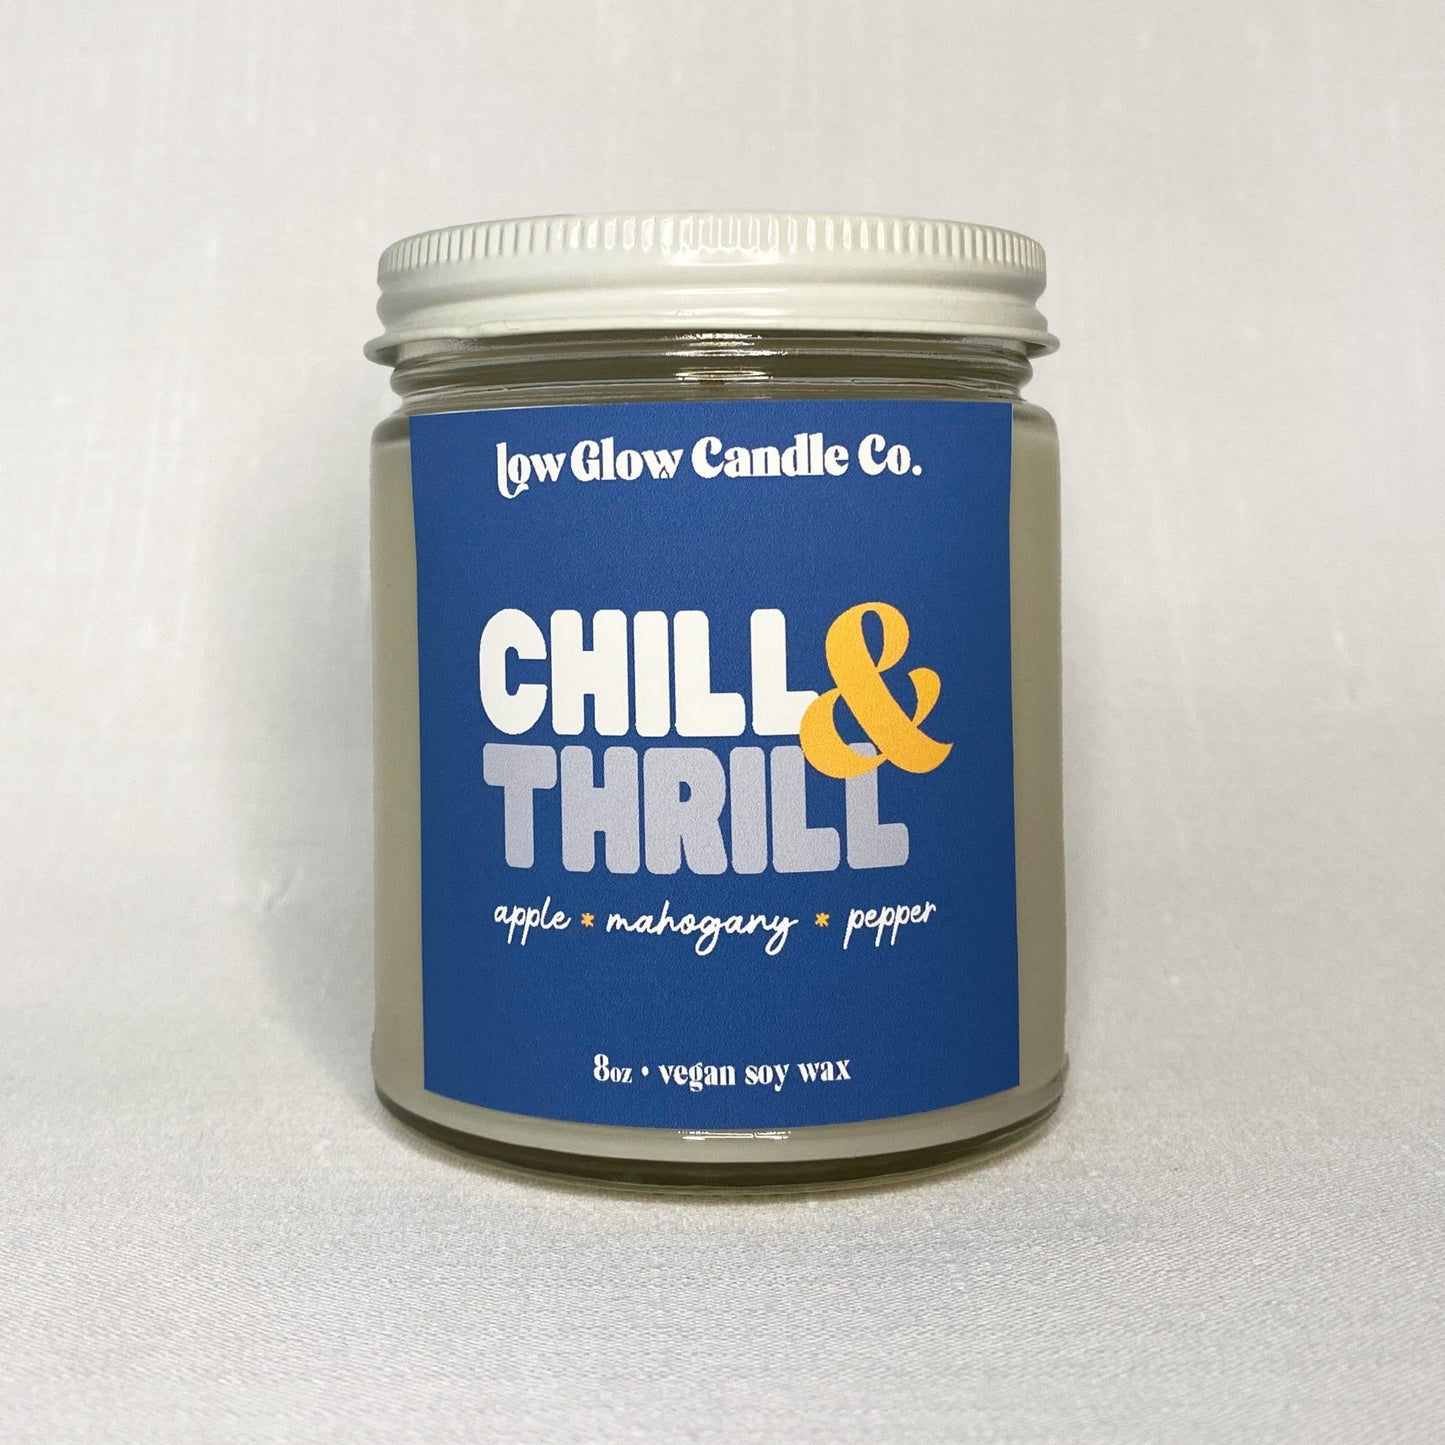 Chill & Thrill Candle